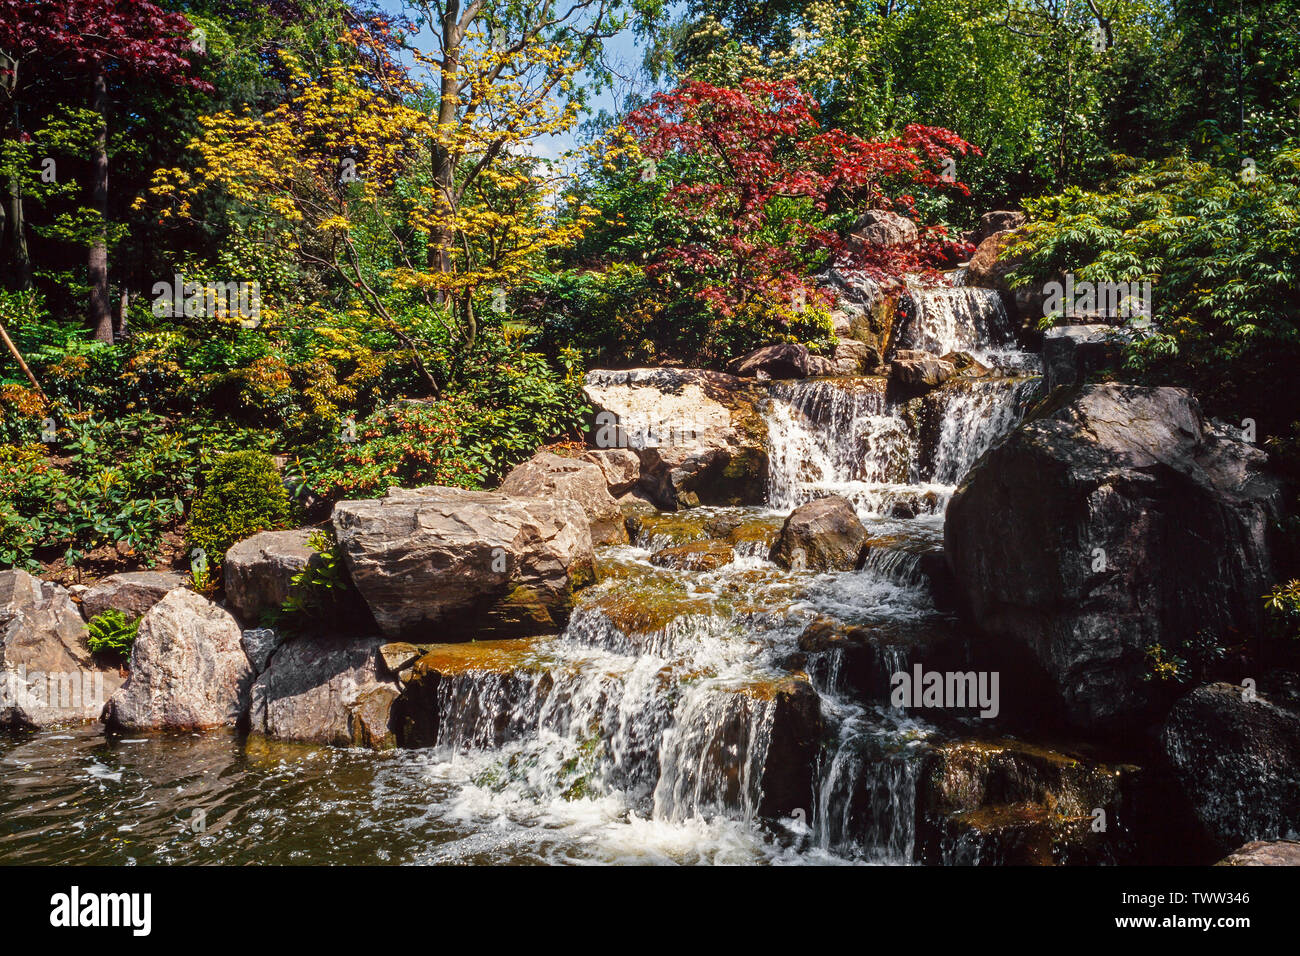 Japanese garde water fall with typical shrubs Stock Photo